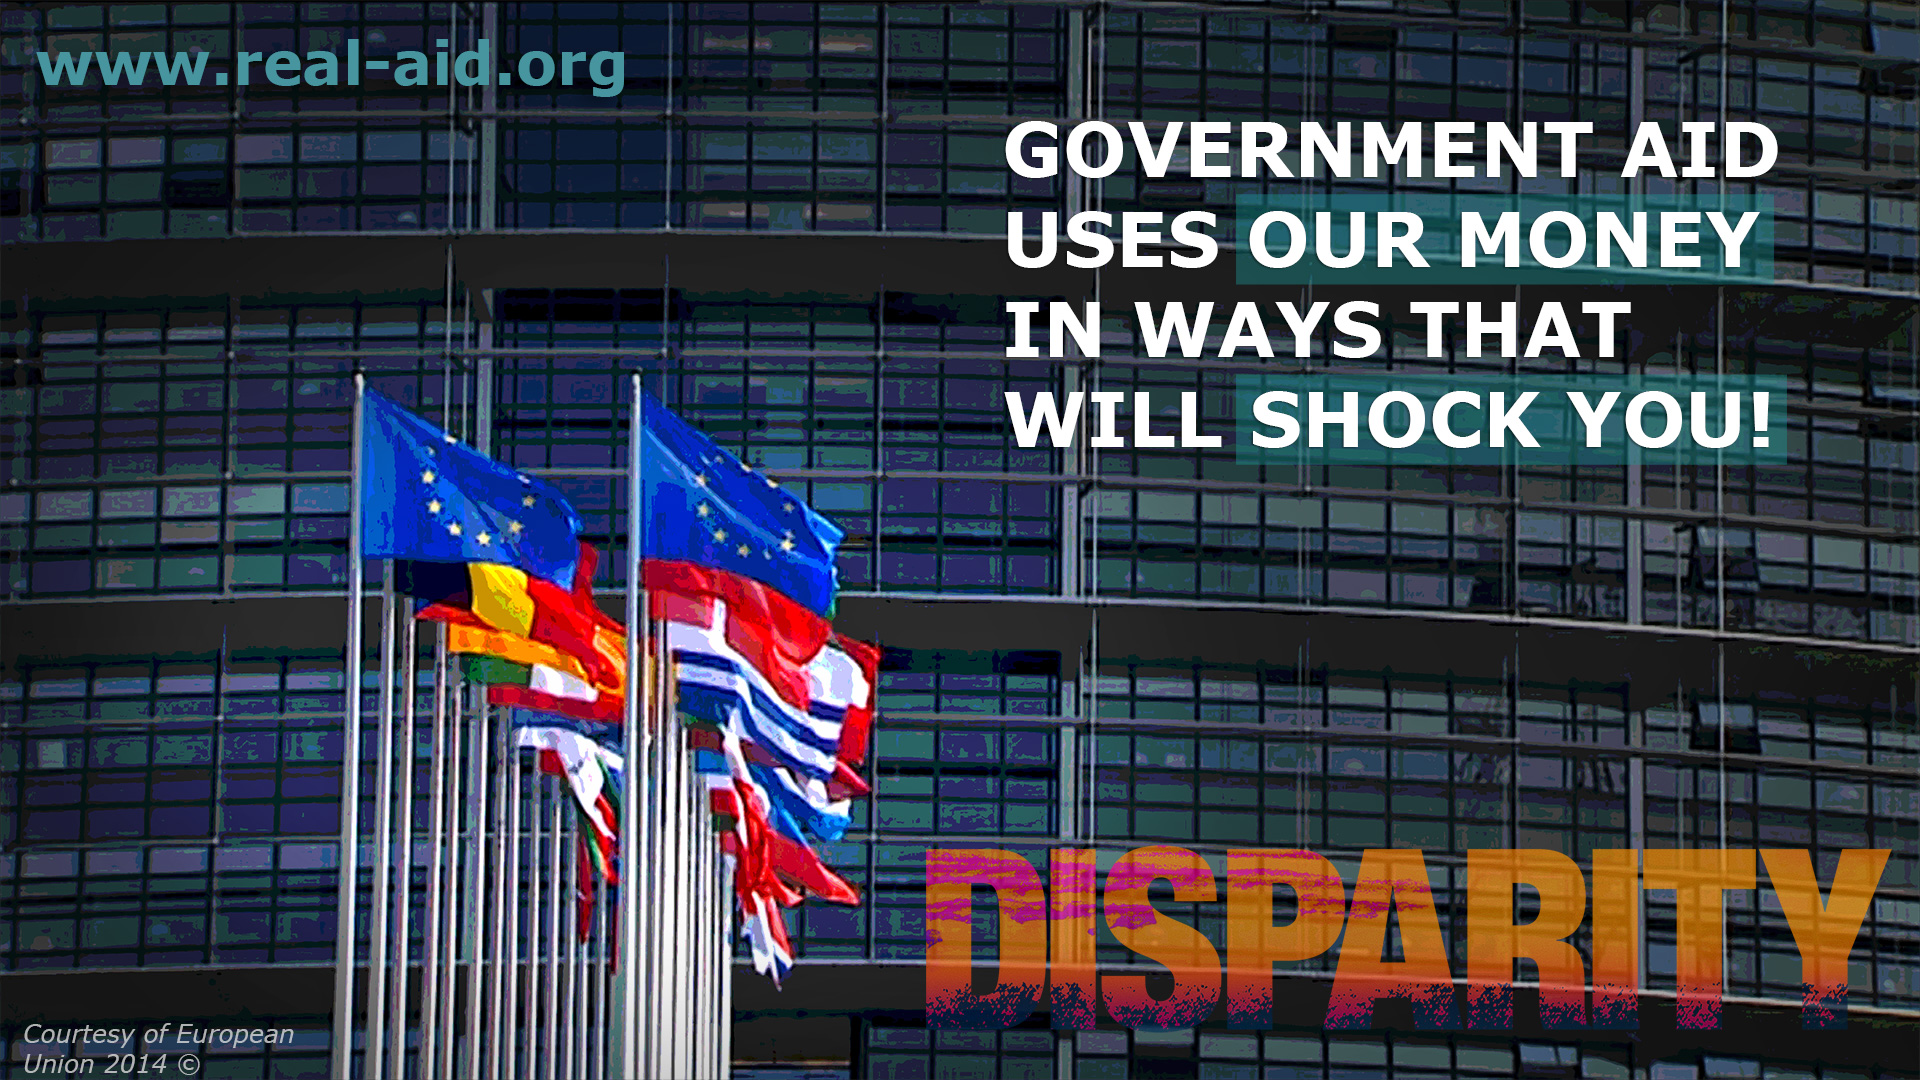 Disparity Film Poster, government aid uses our money in ways that will shock you text, european flags outside building image